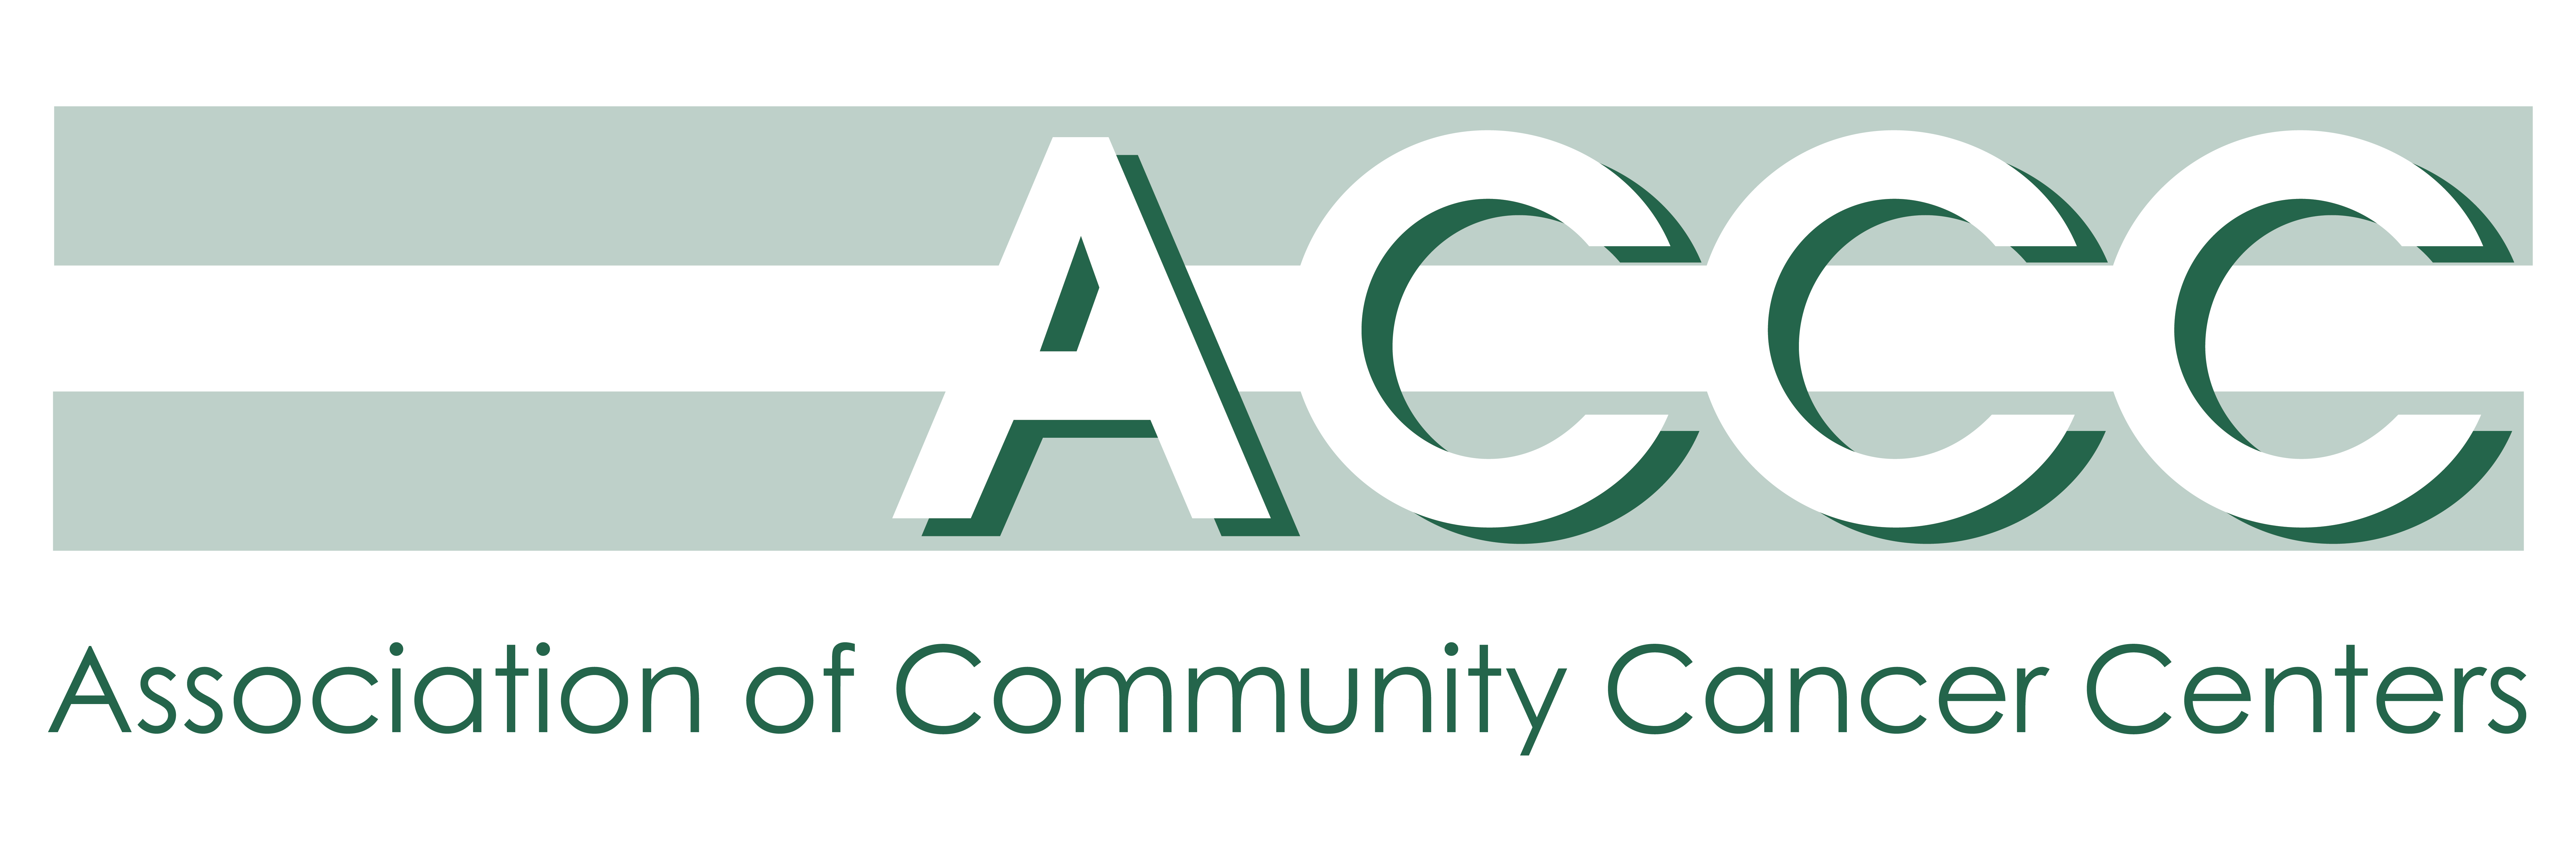 accc logo.png